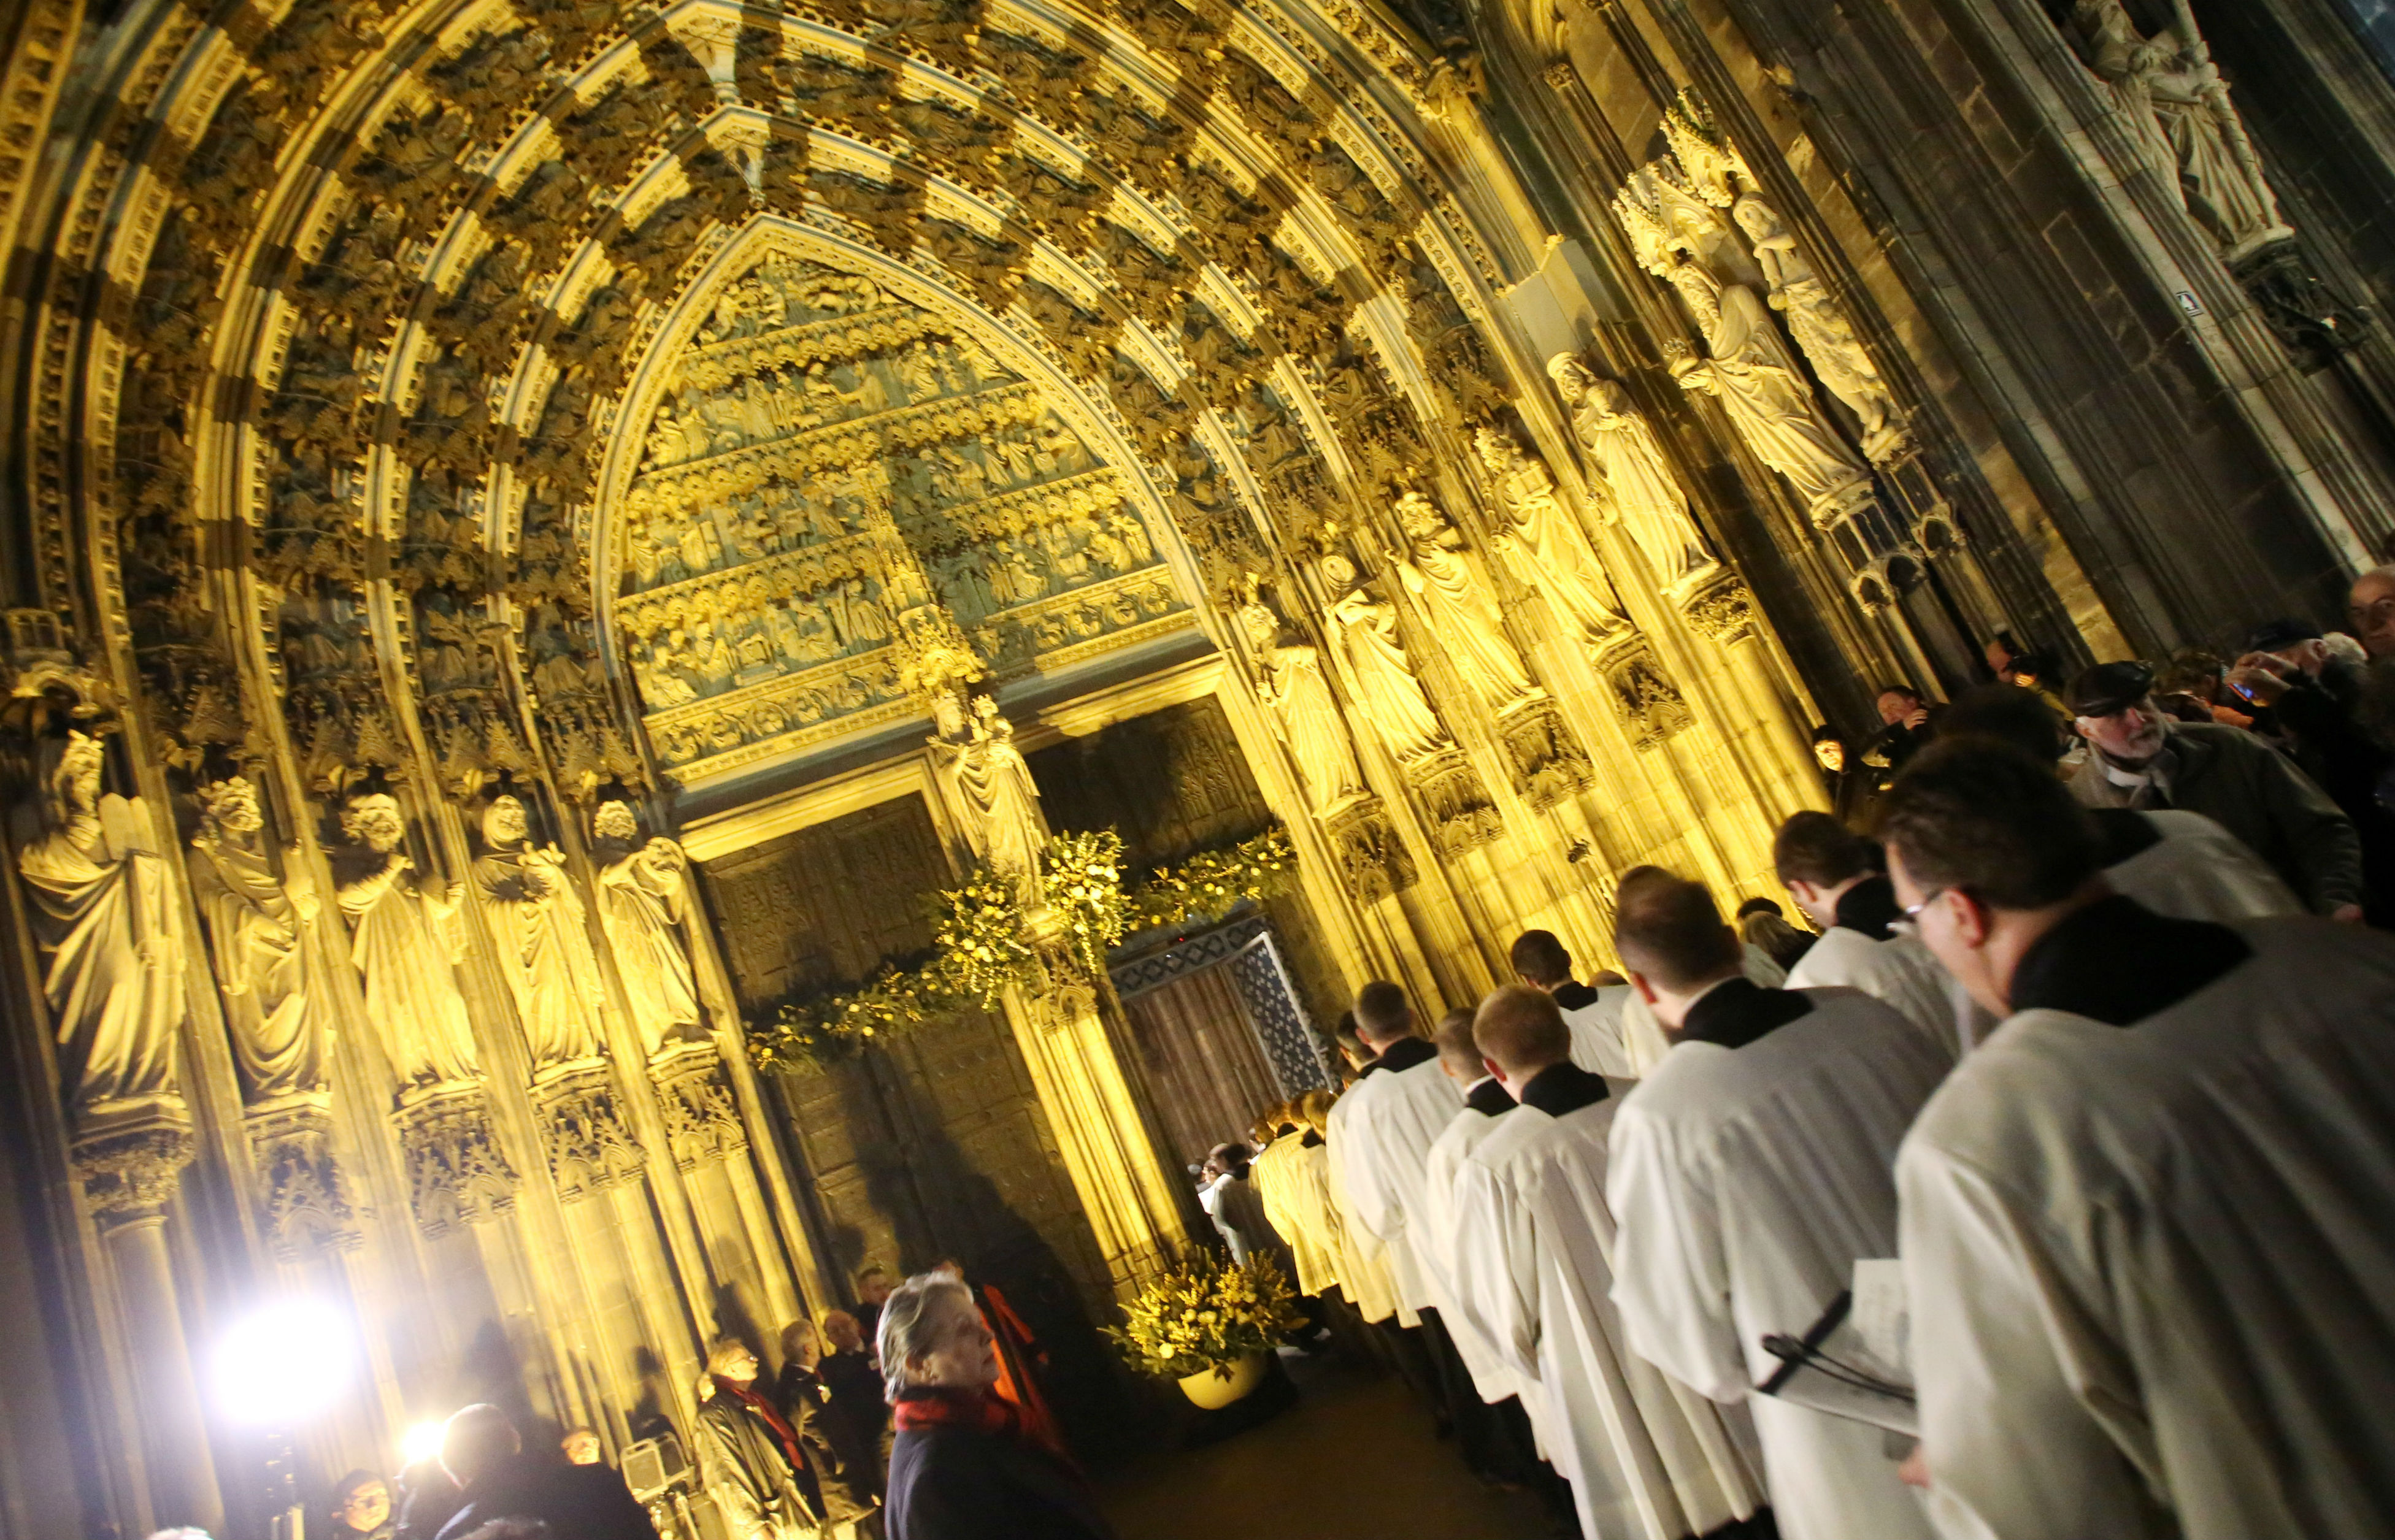 Cologne priests call for women’s ordination